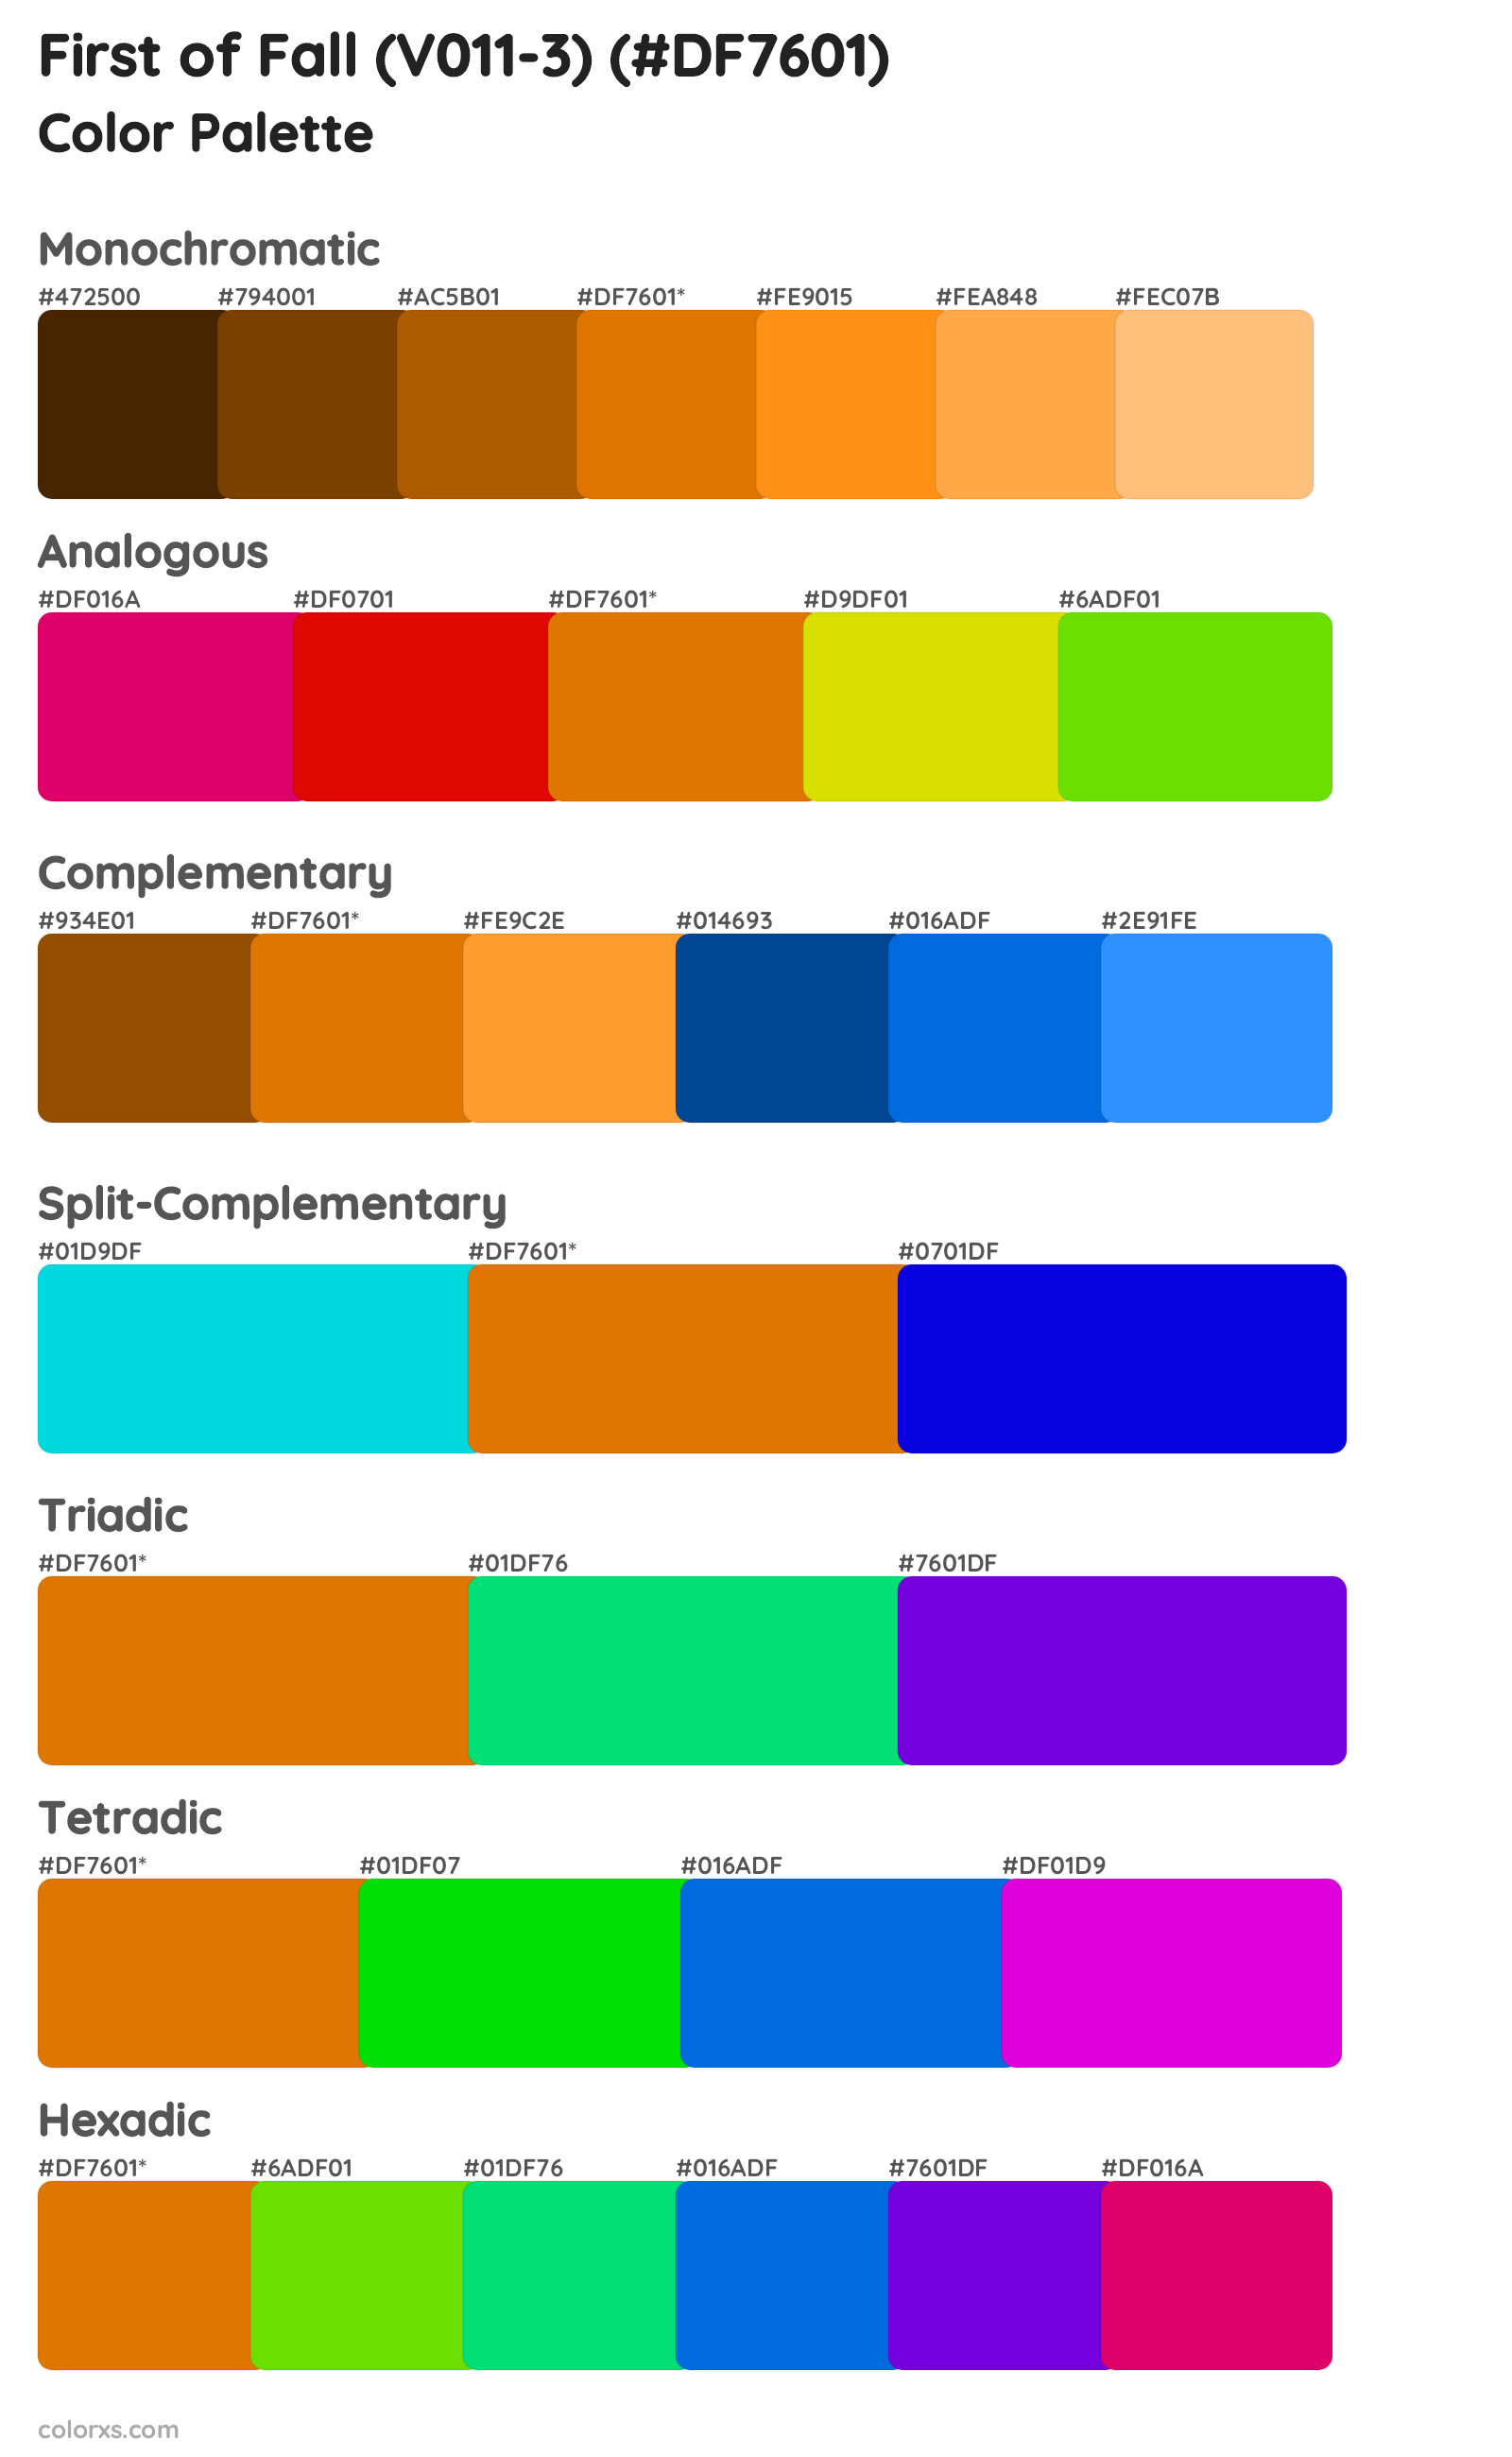 First of Fall (V011-3) Color Scheme Palettes